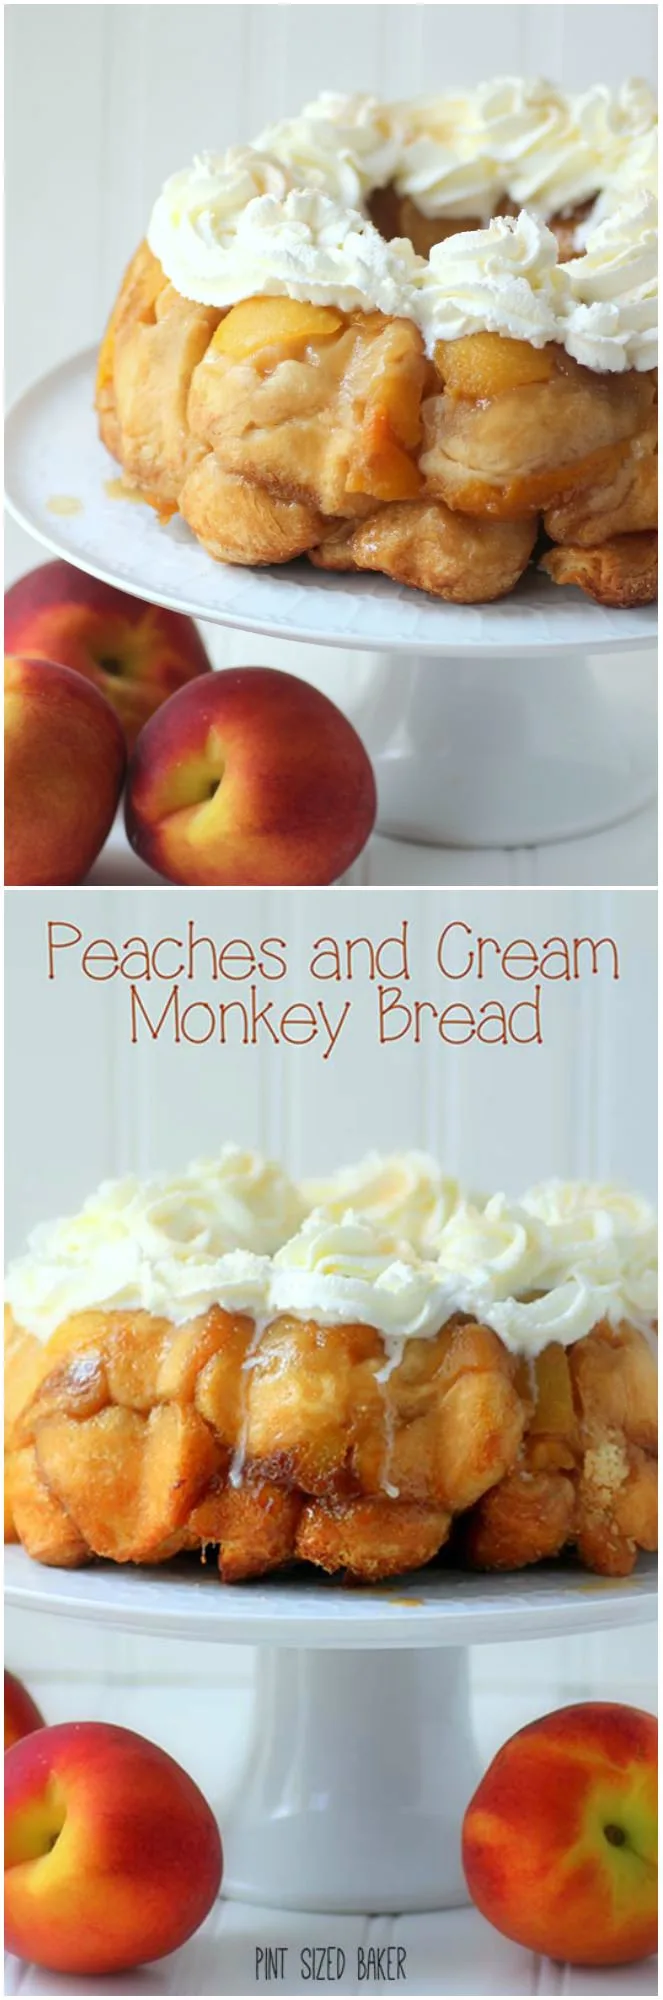 I love this Fresh, Sweet Peaches stuffed into this Peaches and Cream Monkey Bread! It's perfect for a fun breakfast treat!